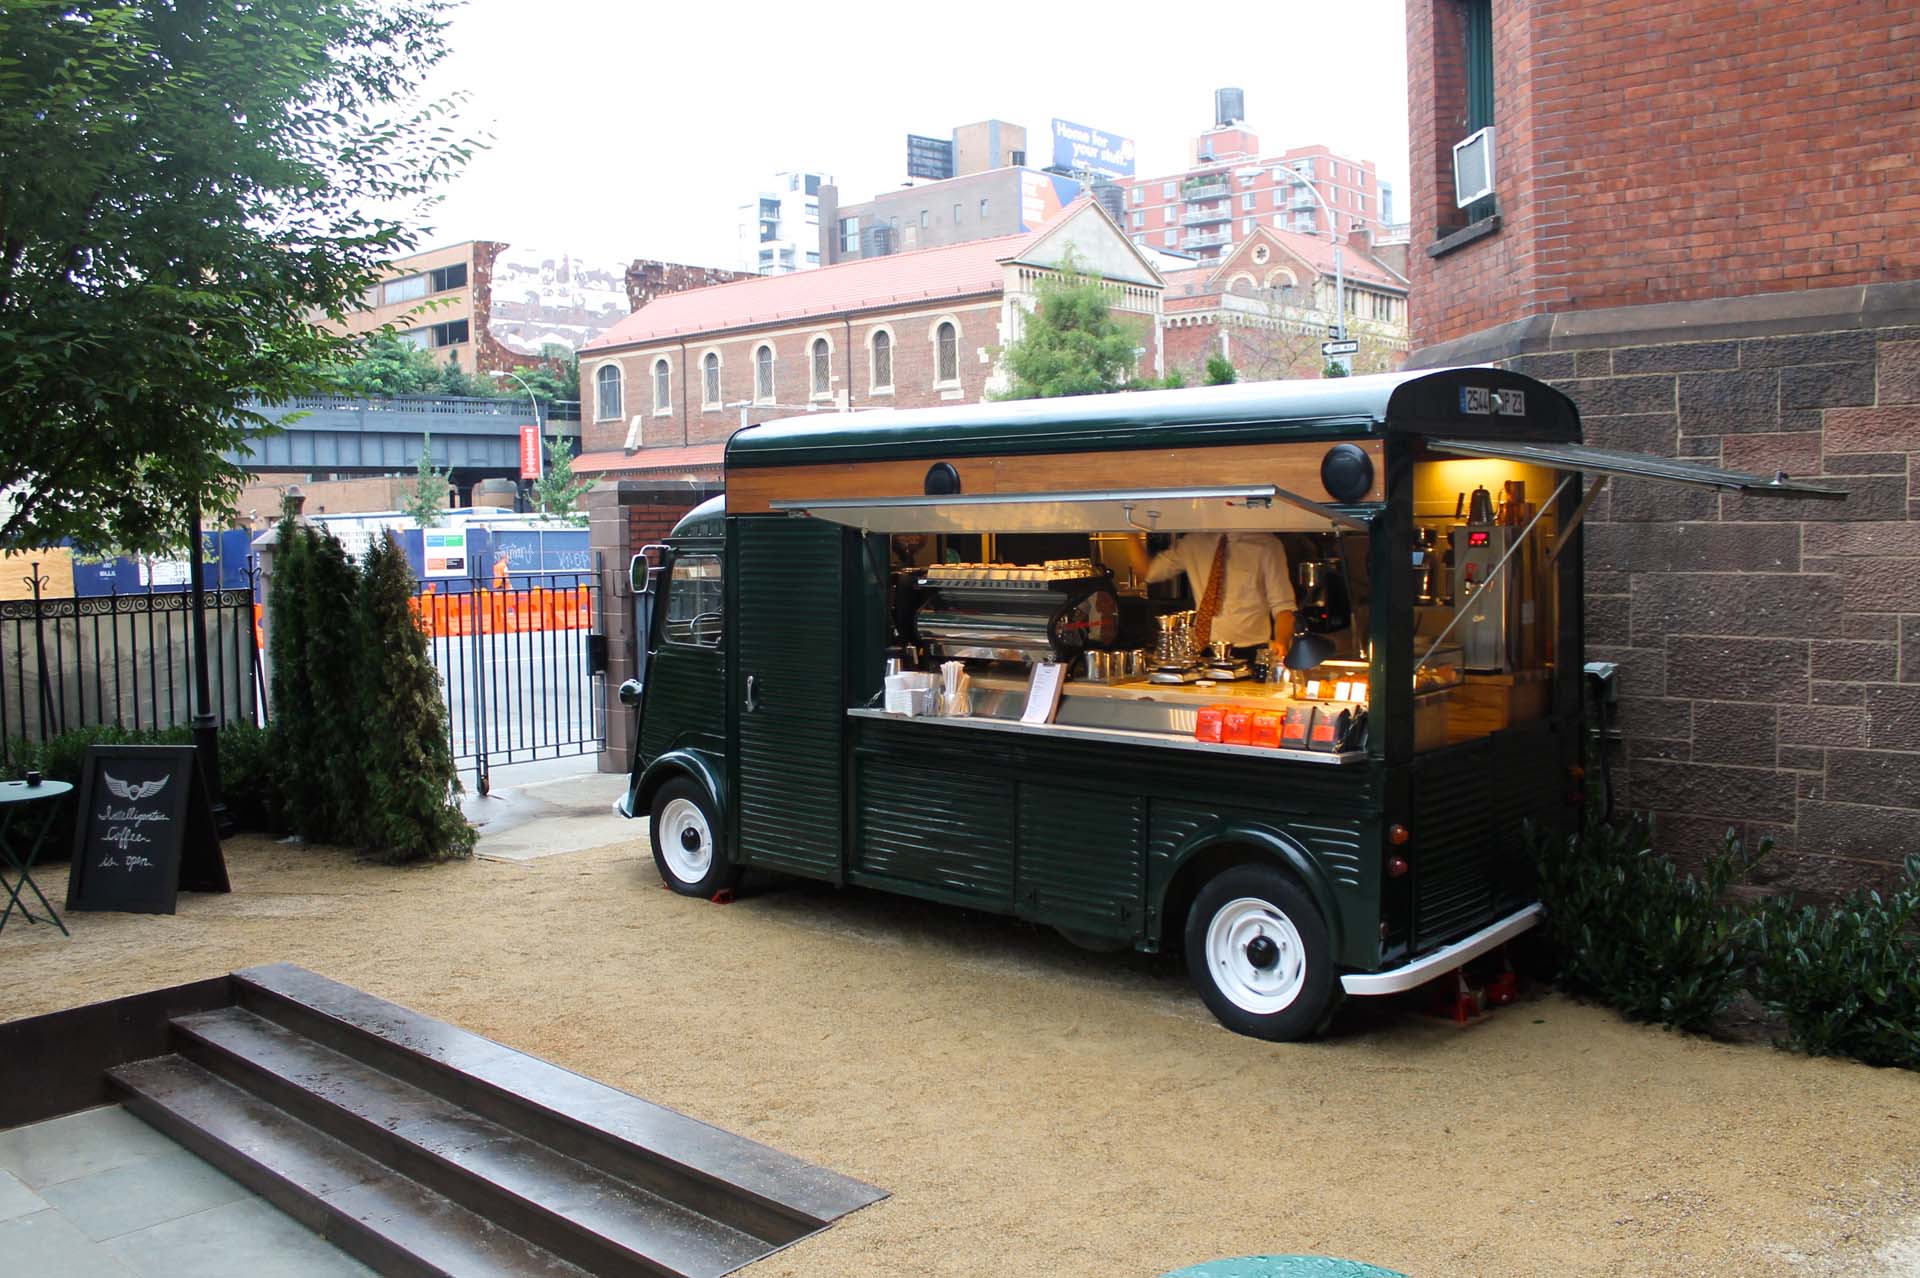 While not as crazy as a giant, pig-shaped truck, Intelligentsia scores big points for fitting into its environment, hip, trendy downtown Manhattan, serving up coffee just outside the swank High Line Hotel at the corner of 10<sup>th</sup> Ave and 20<sup>th</sup> St. Starting with a 1967 Citroen HY Van, its designers retrofitted the interior to house a full barista bar and service counter. And painted it black, of course.